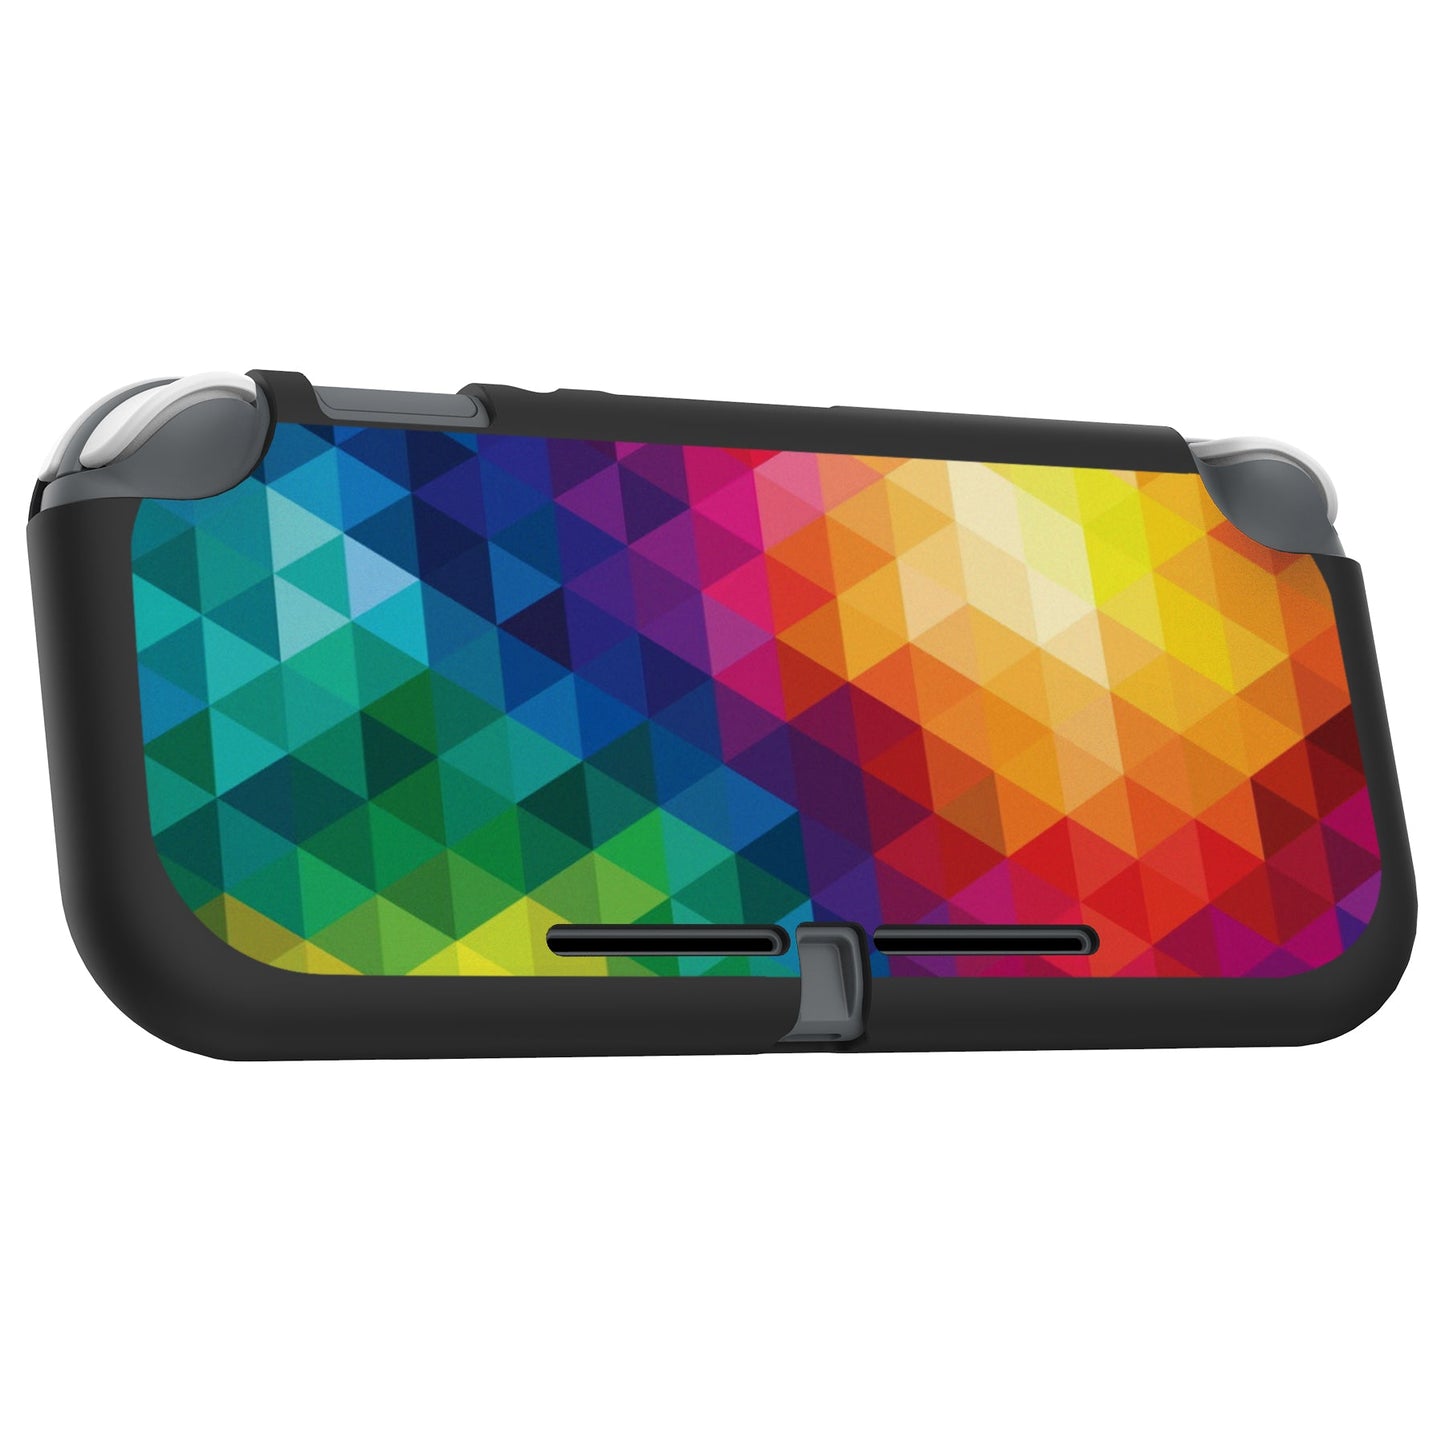 PlayVital Colorful Triangle Custom Protective Case for NS Switch Lite, Soft TPU Slim Case Cover for NS Switch Lite - LTU6014 PlayVital